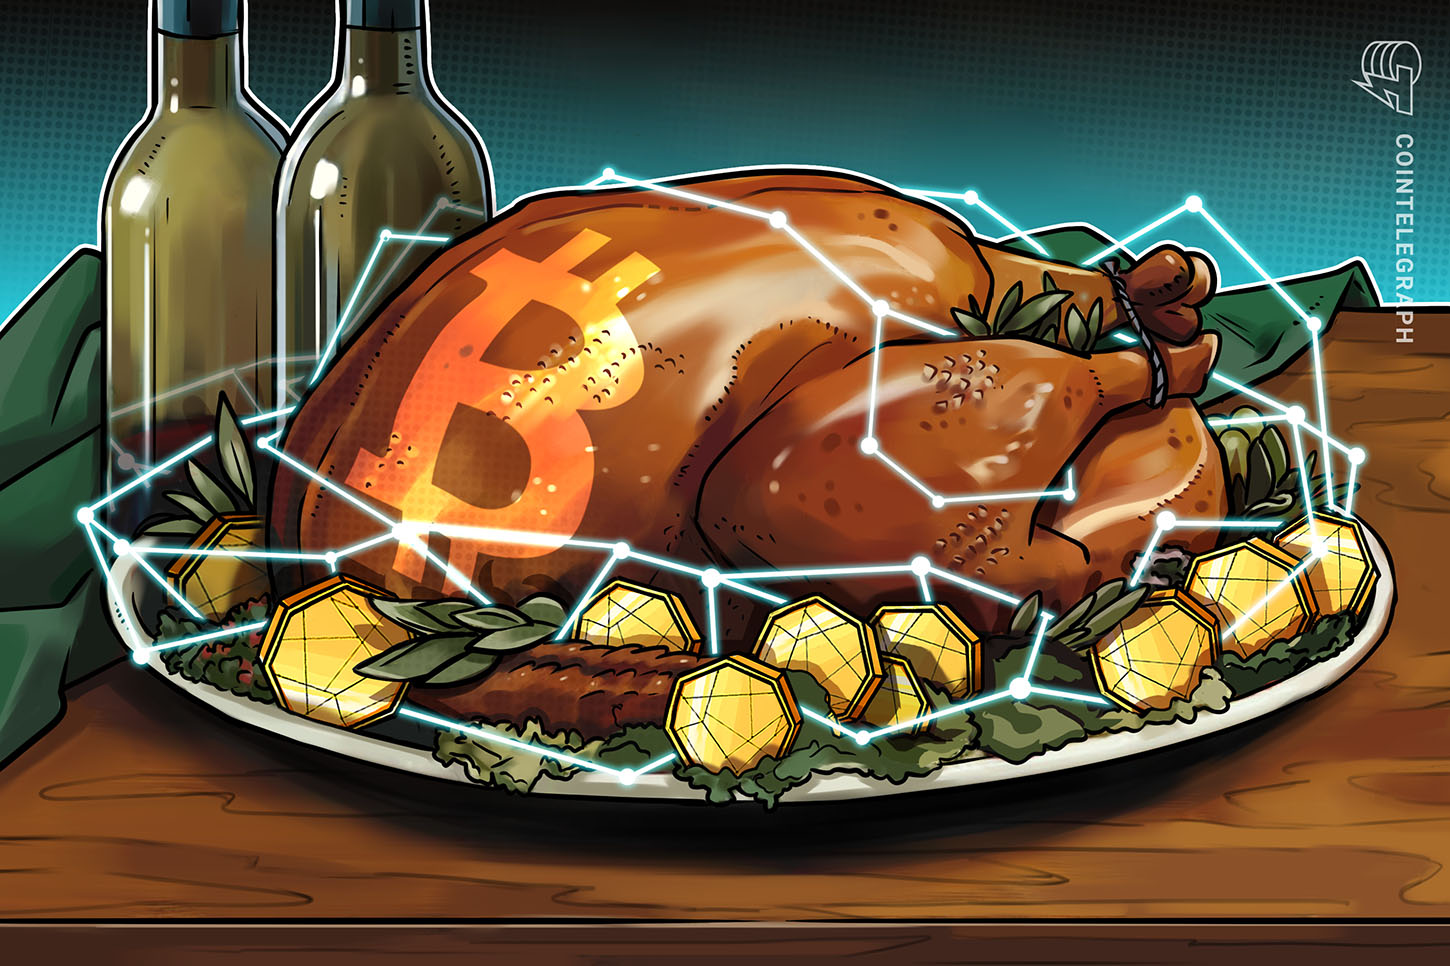 Bitcoin and blockchain matters to debate with the crypto curious this Thanksgiving